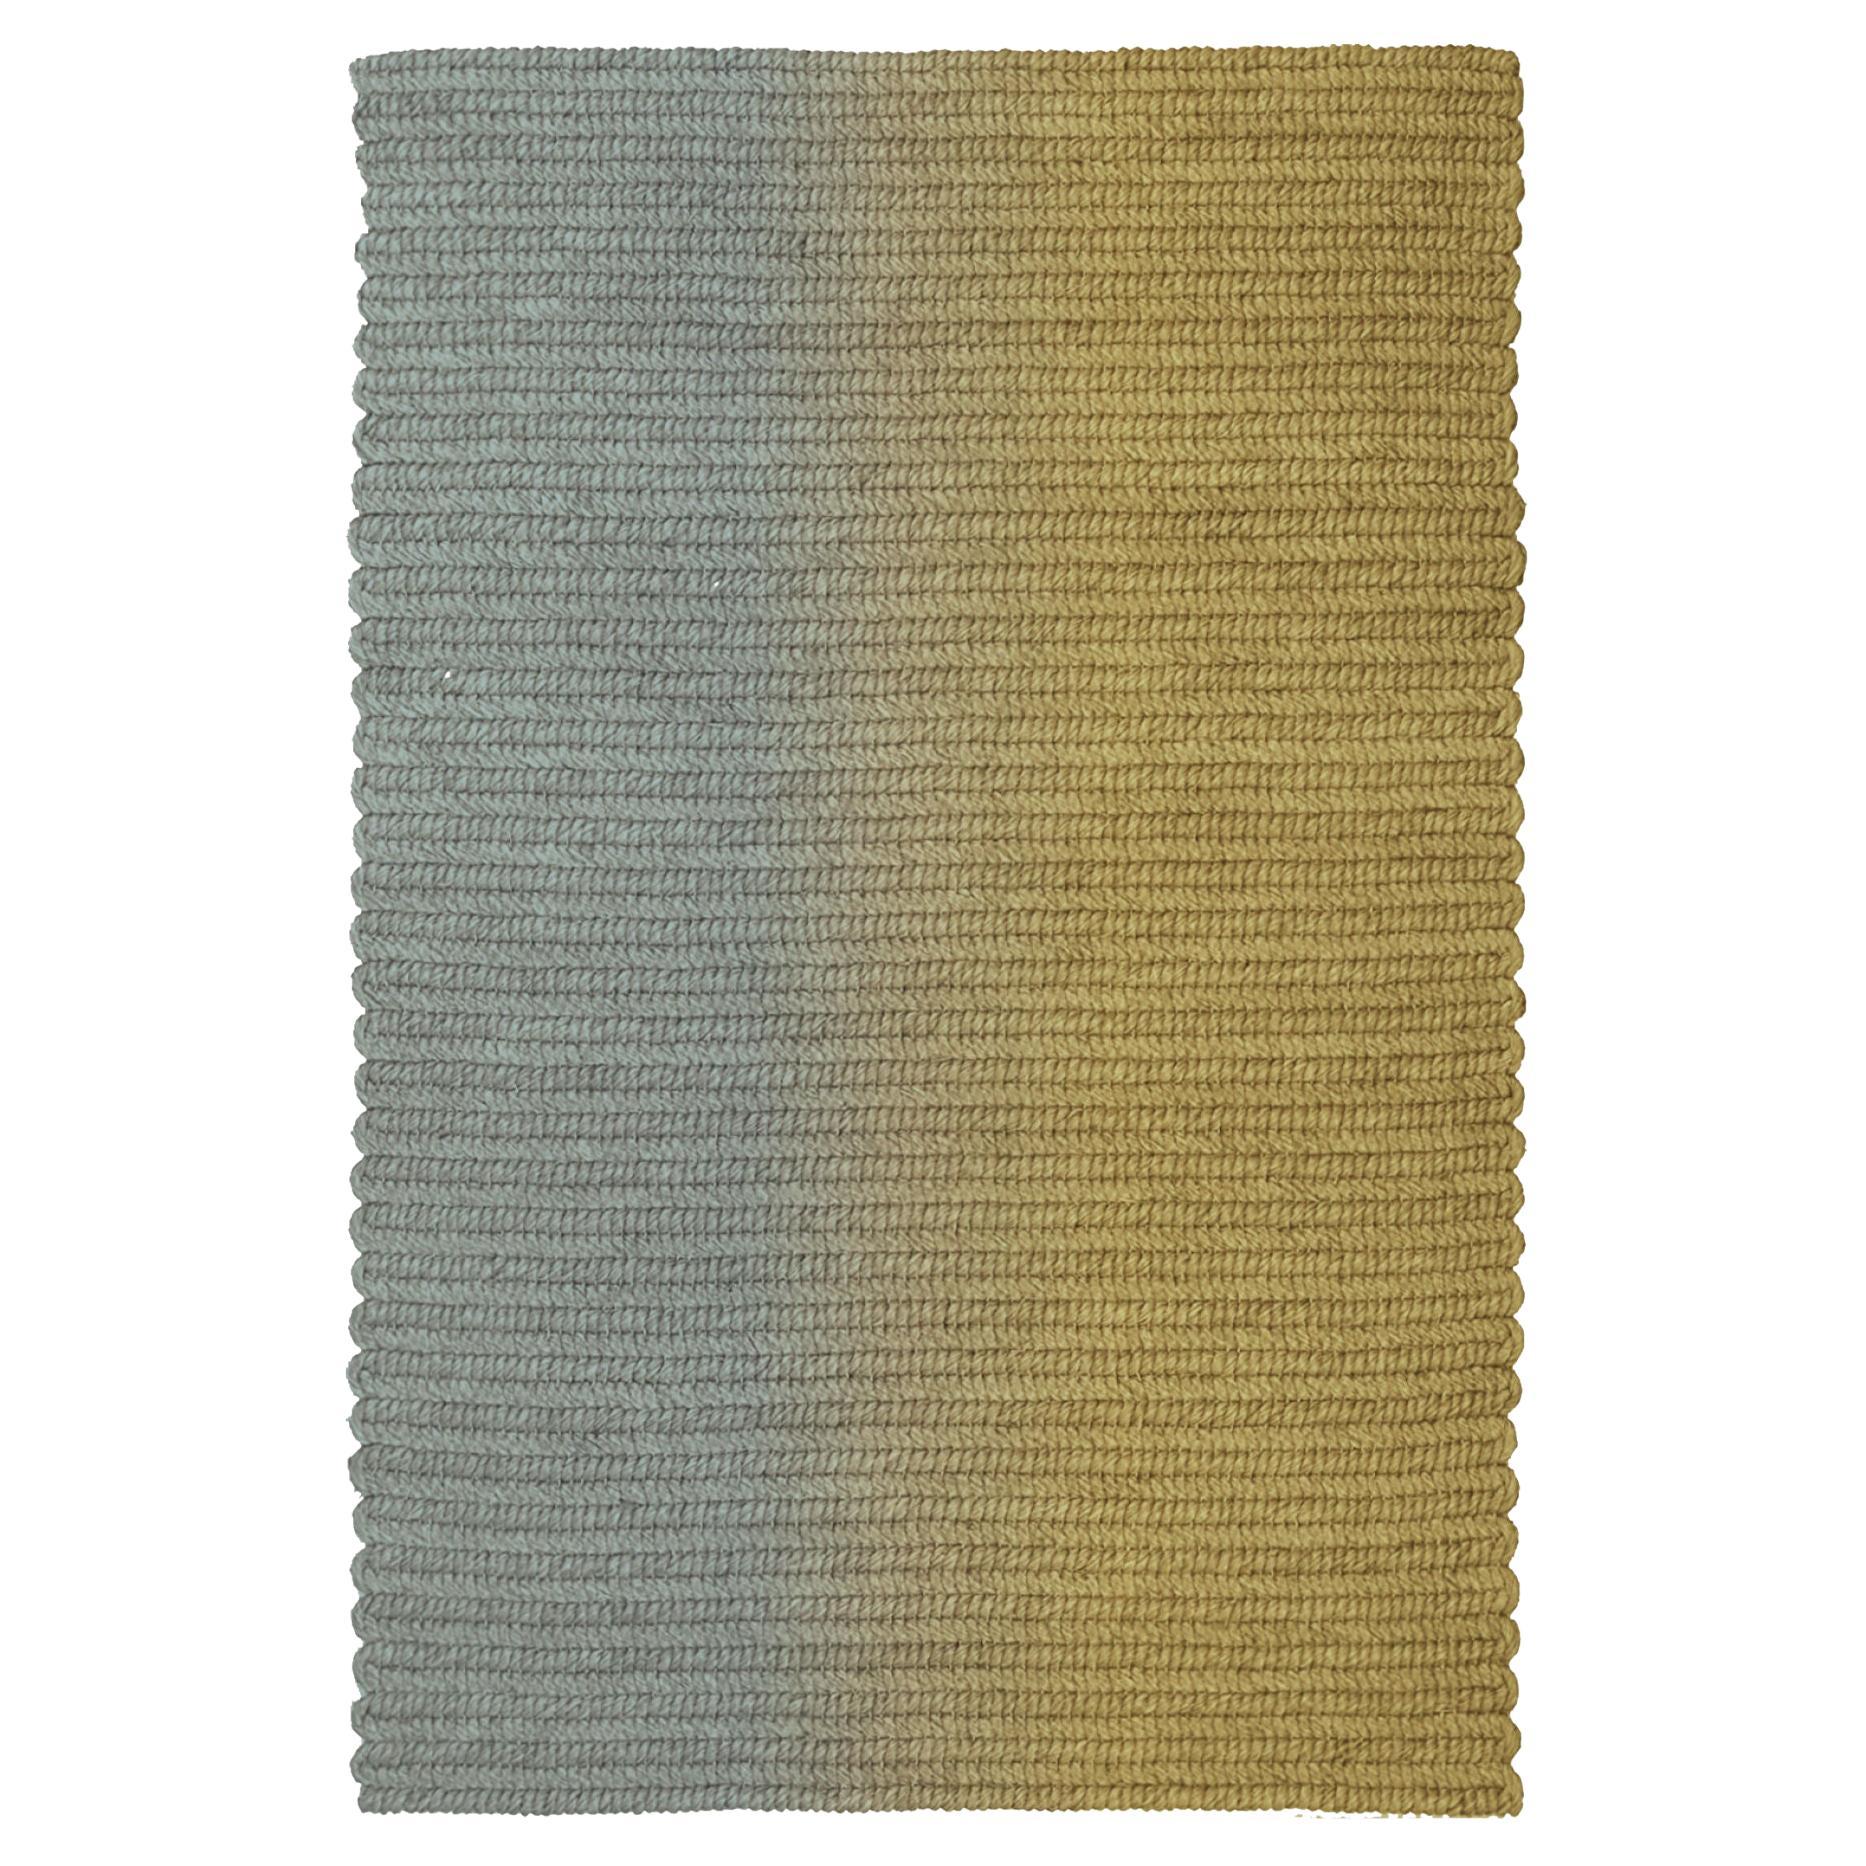 'Switch' Rug in Abaca, 'Pampas' by Claire Vos for Musett Design For Sale